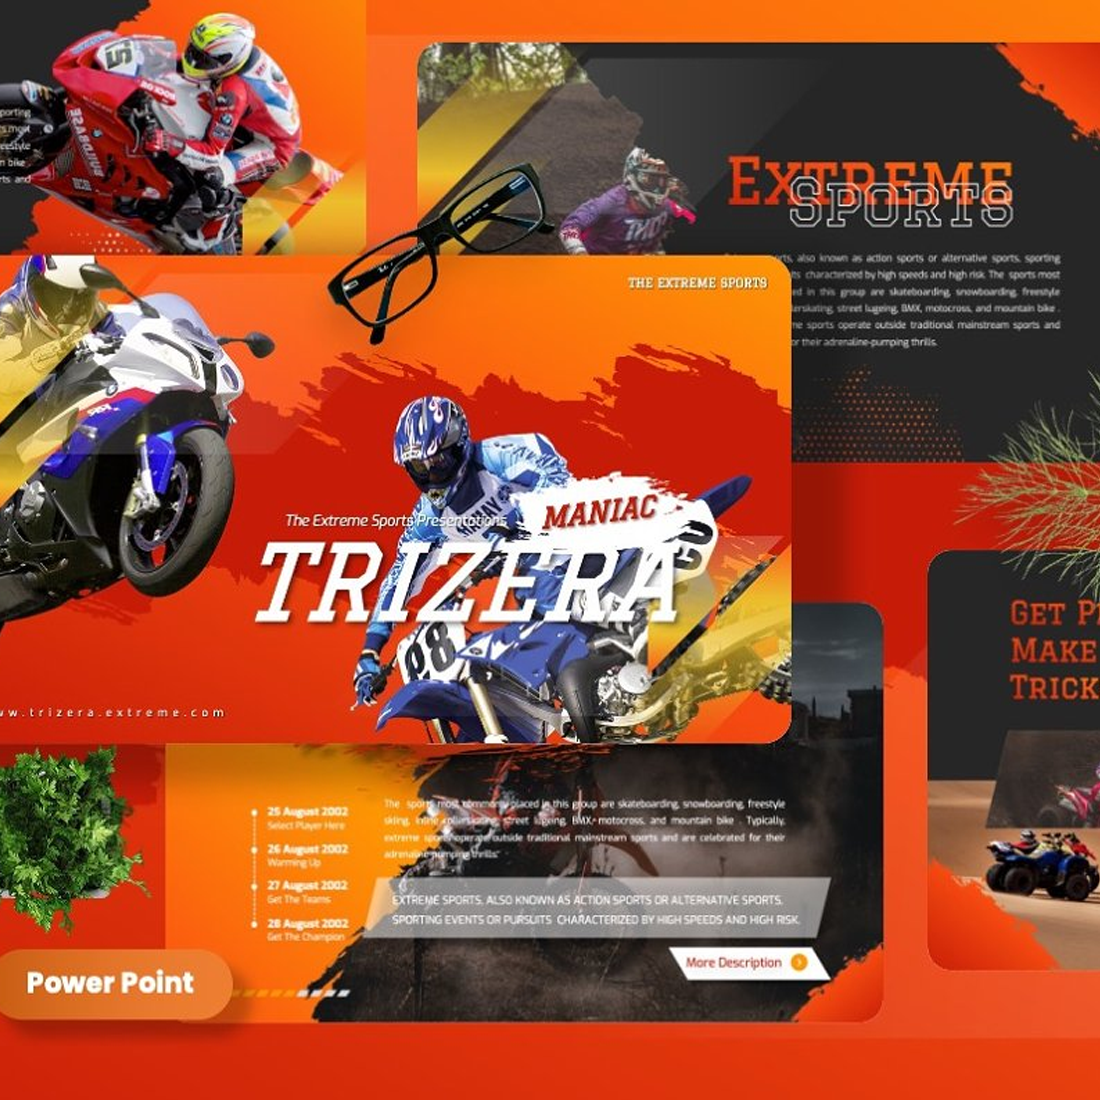 Images preview trizera extreme sport powerpoint.